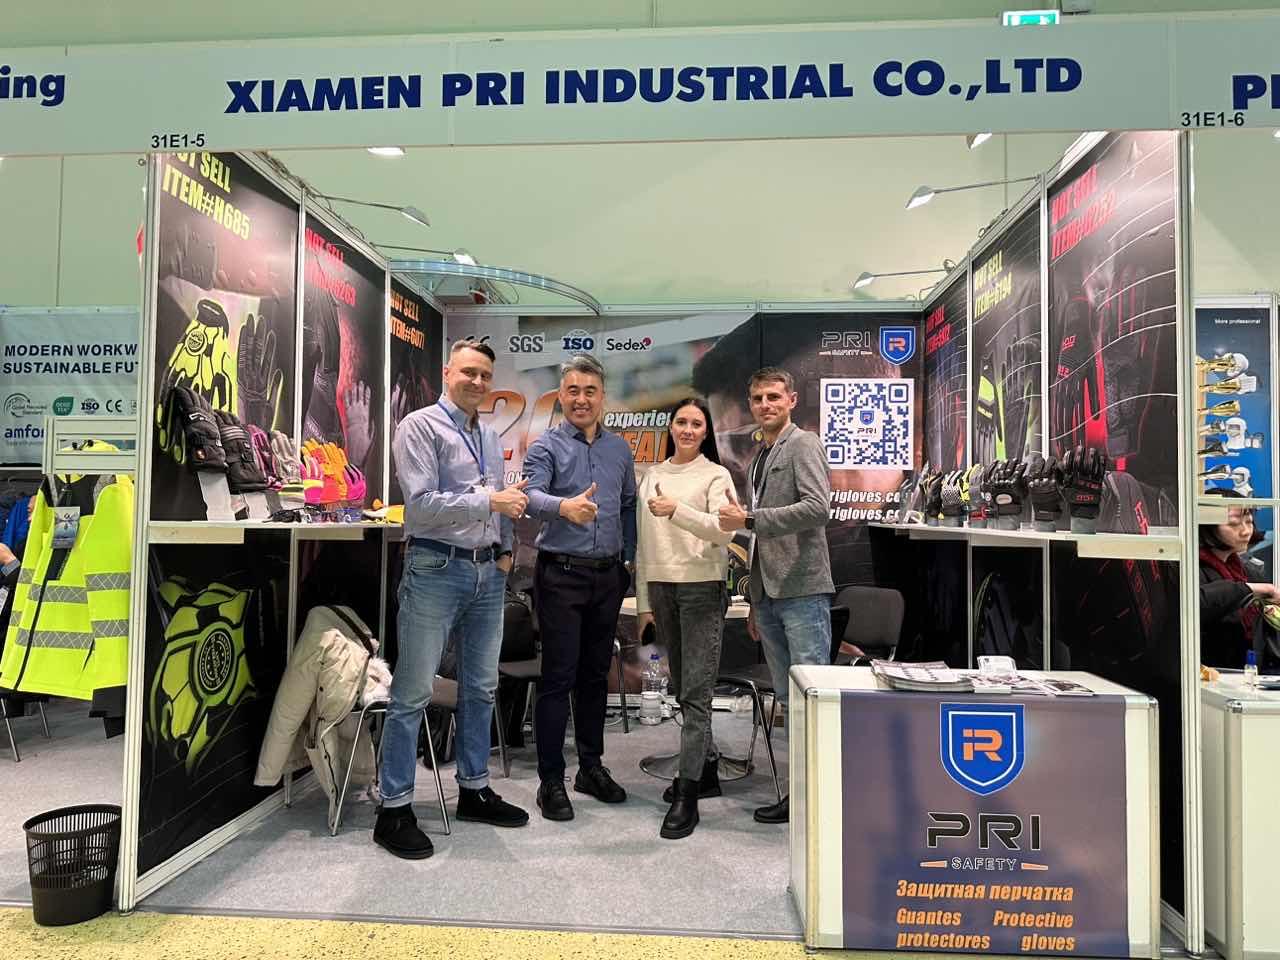 PRISAFETY Shines at BIOT Labor Protection Exhibition in Moscow